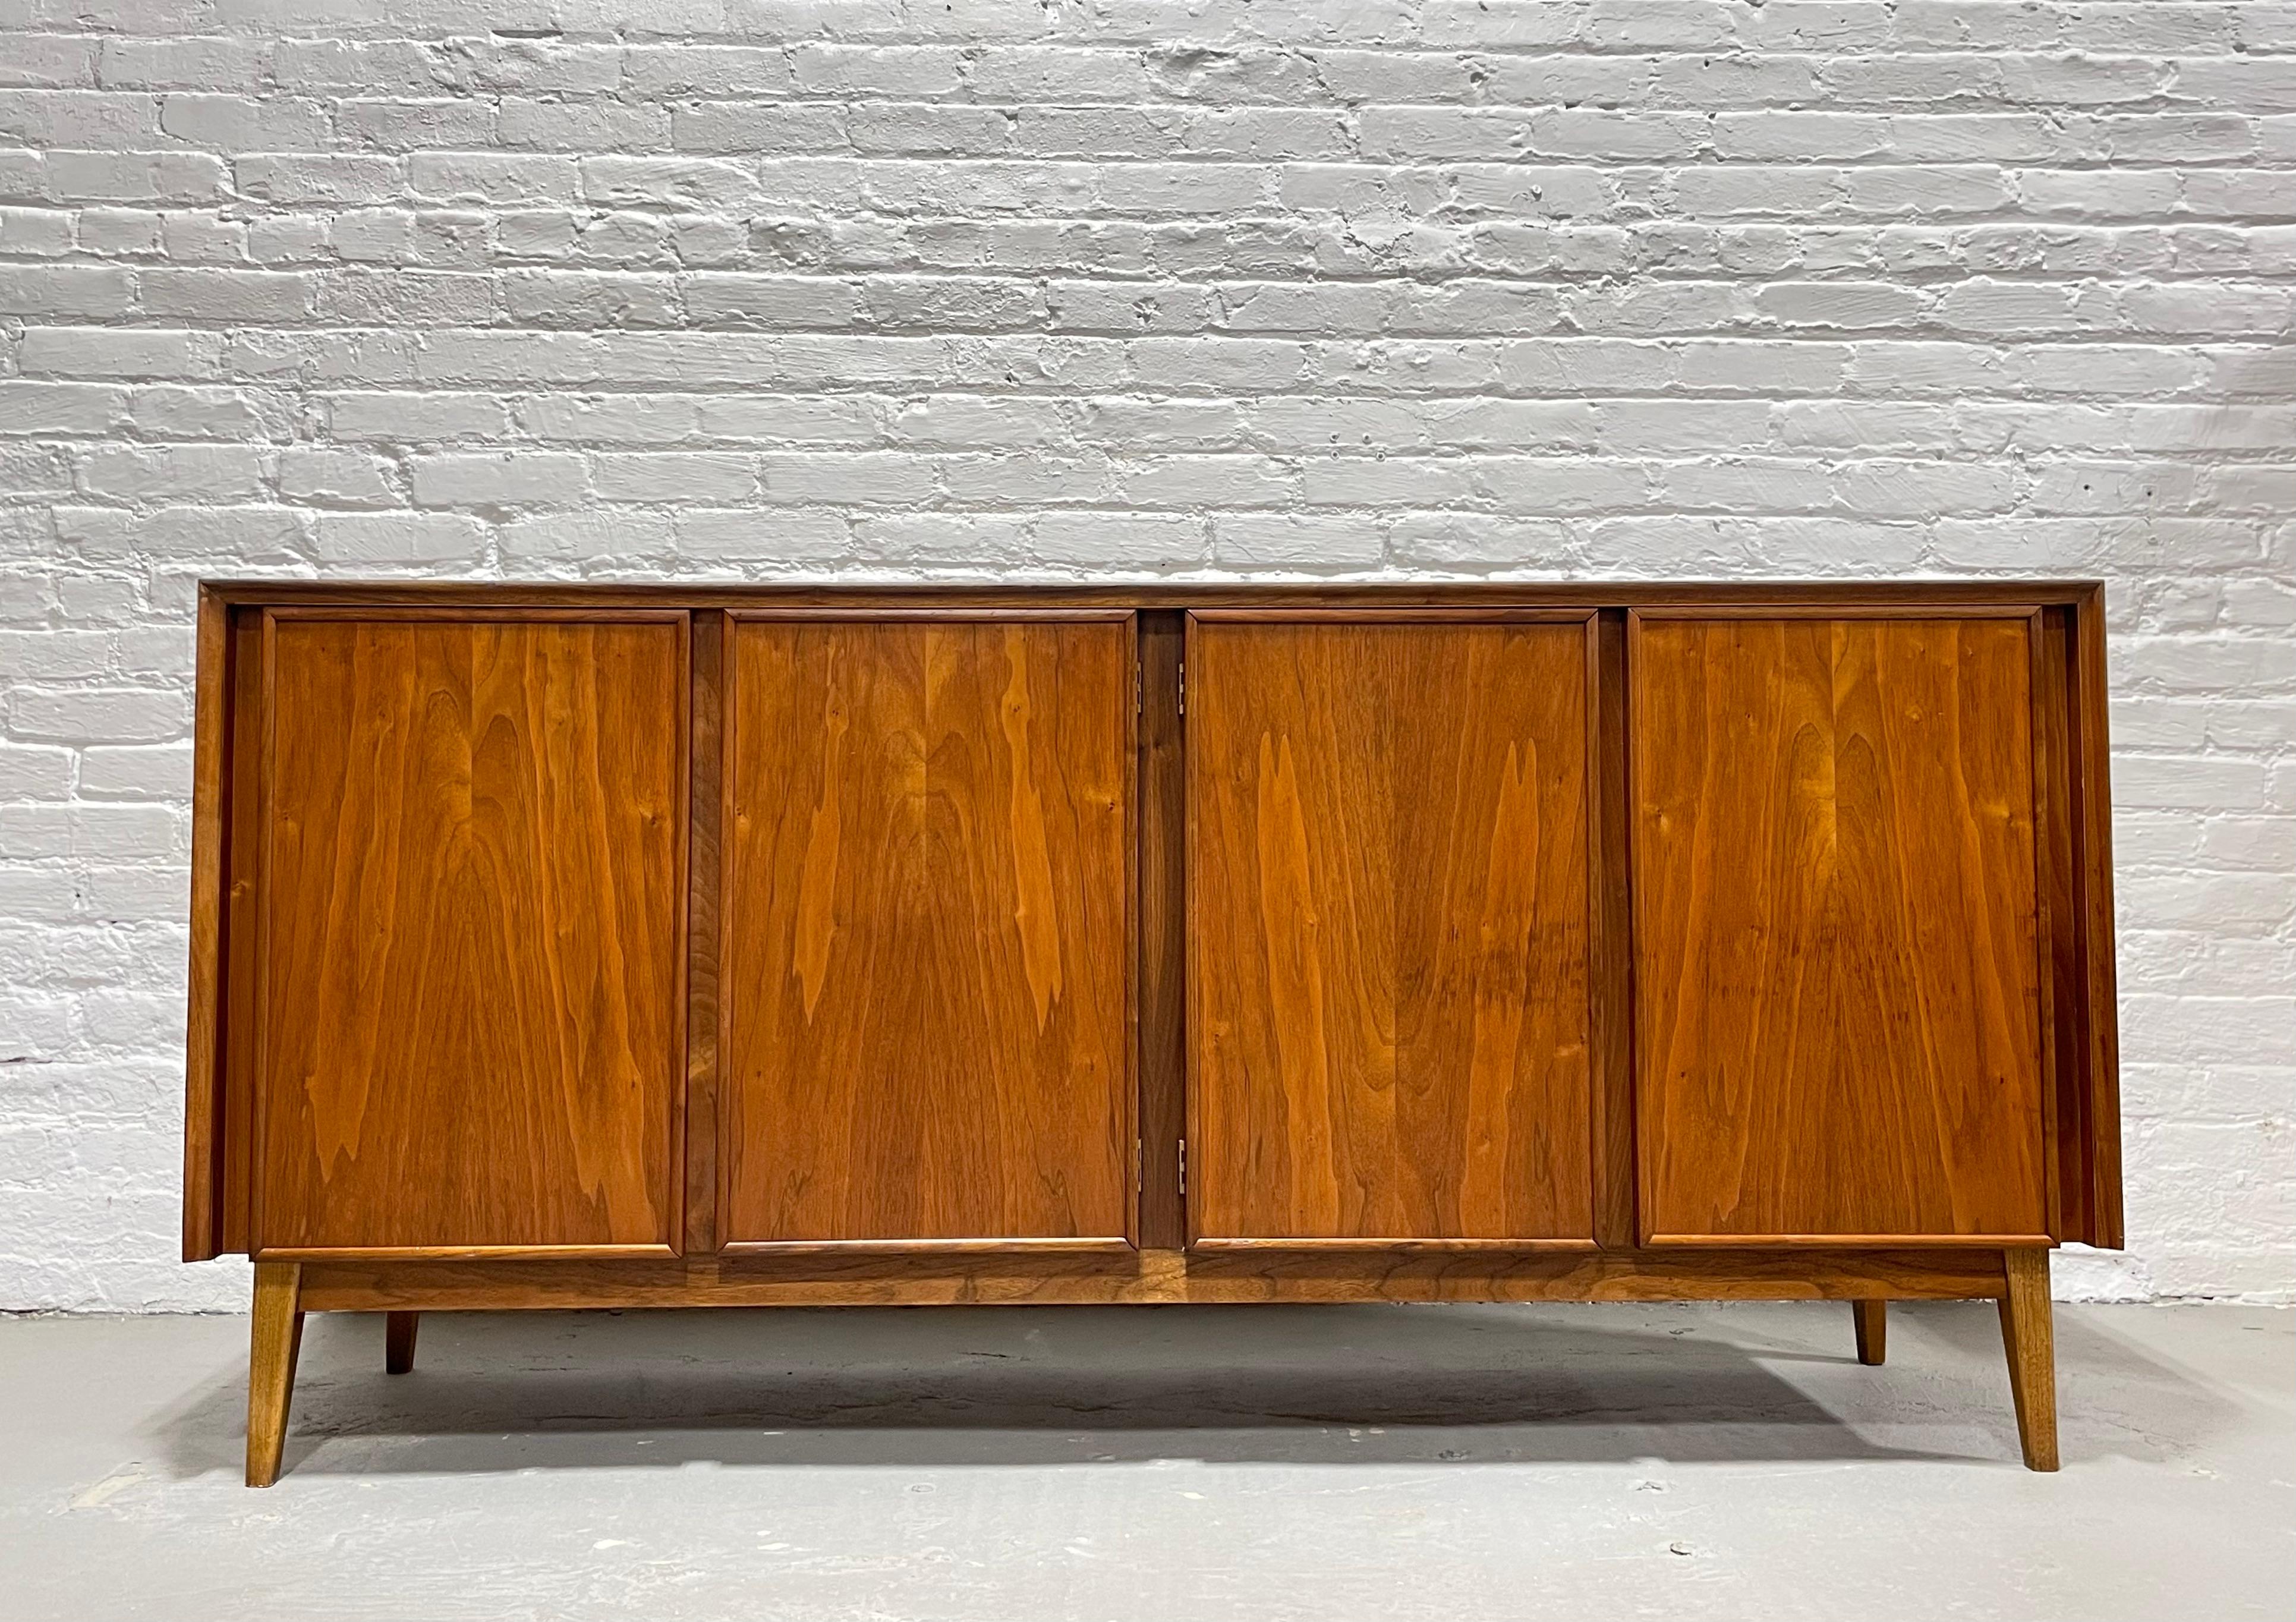 Simple + perfect Mid-Century Modern walnut Credenza / Media stand designed by Merton Gershun for American of Martinsville. This classic credenza features a simple front panel design and is constructed of walnut with the most gorgeous wood grains.